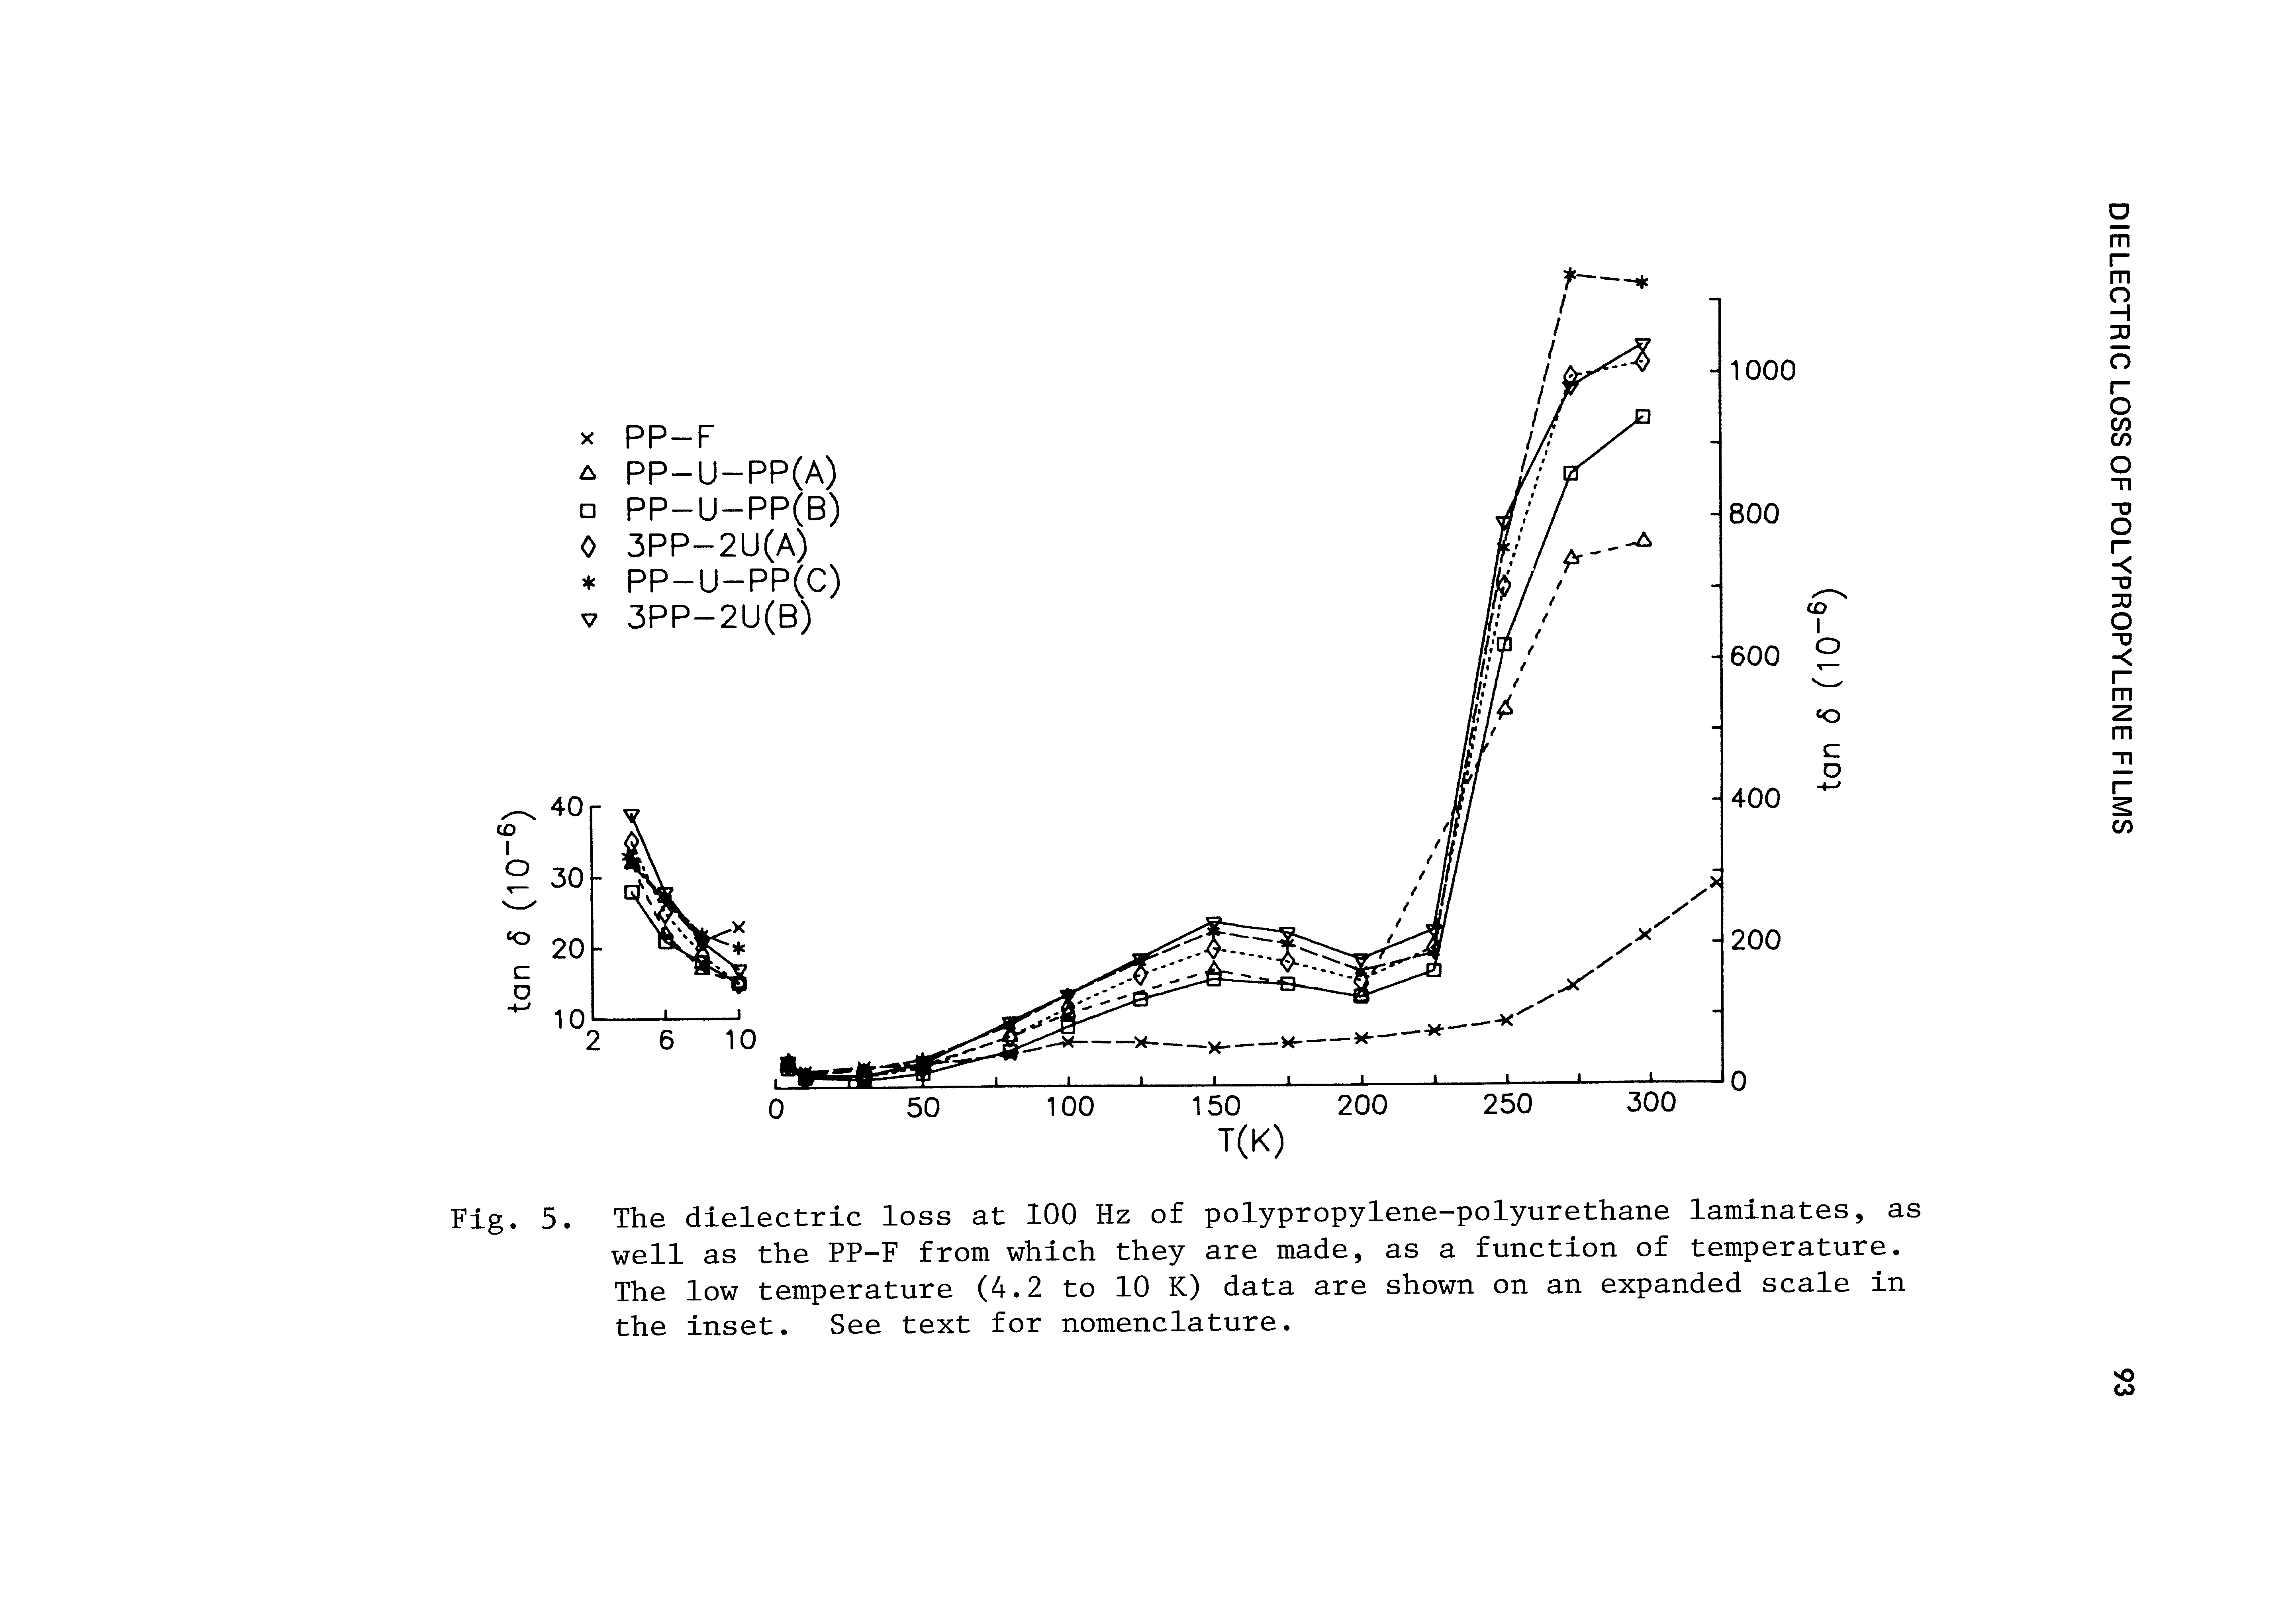 Fig. 5. The dielectric loss at 100 Hz of polypropylene-polyurethane laminates, as well as the PP-F from which they are made, as a function of temperature. The low temperature (4.2 to 10 K) data are shown on an expanded scale in the inset. See text for nomenclature.